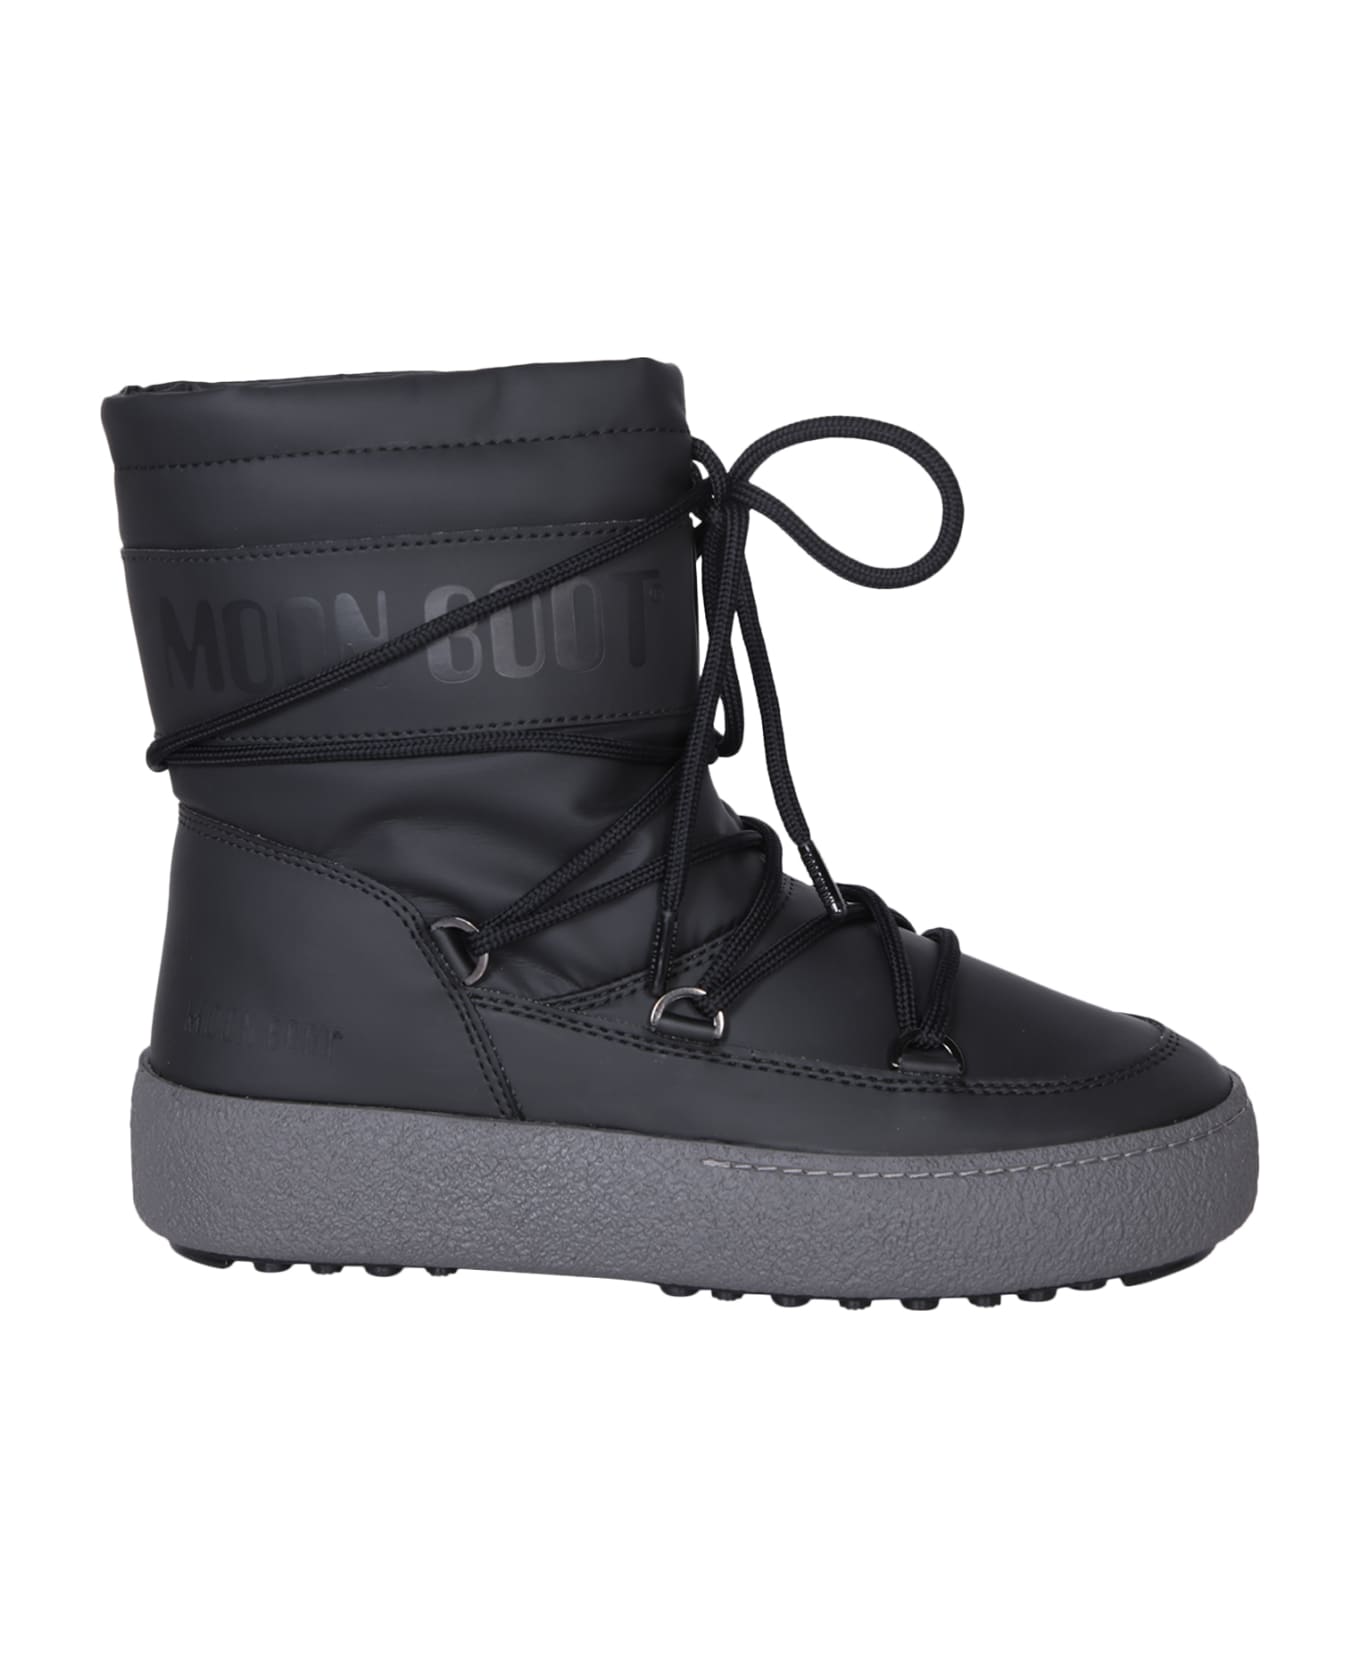 Moon Boot Mtrack Tube Black Ankle Boot - Black ブーツ